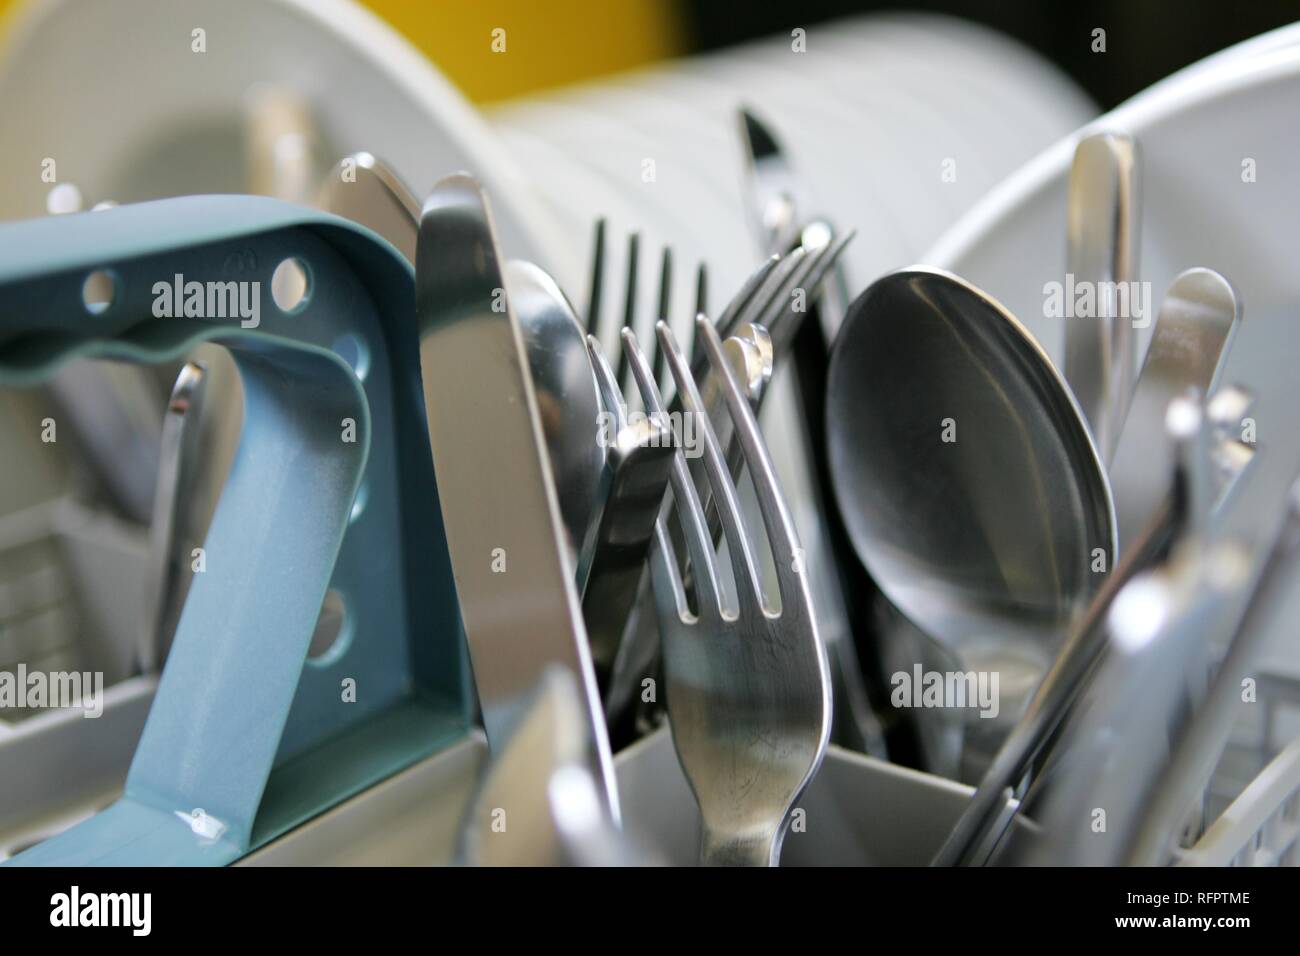 DEU, Germany: Clean dishes in a dishwasher. Stock Photo